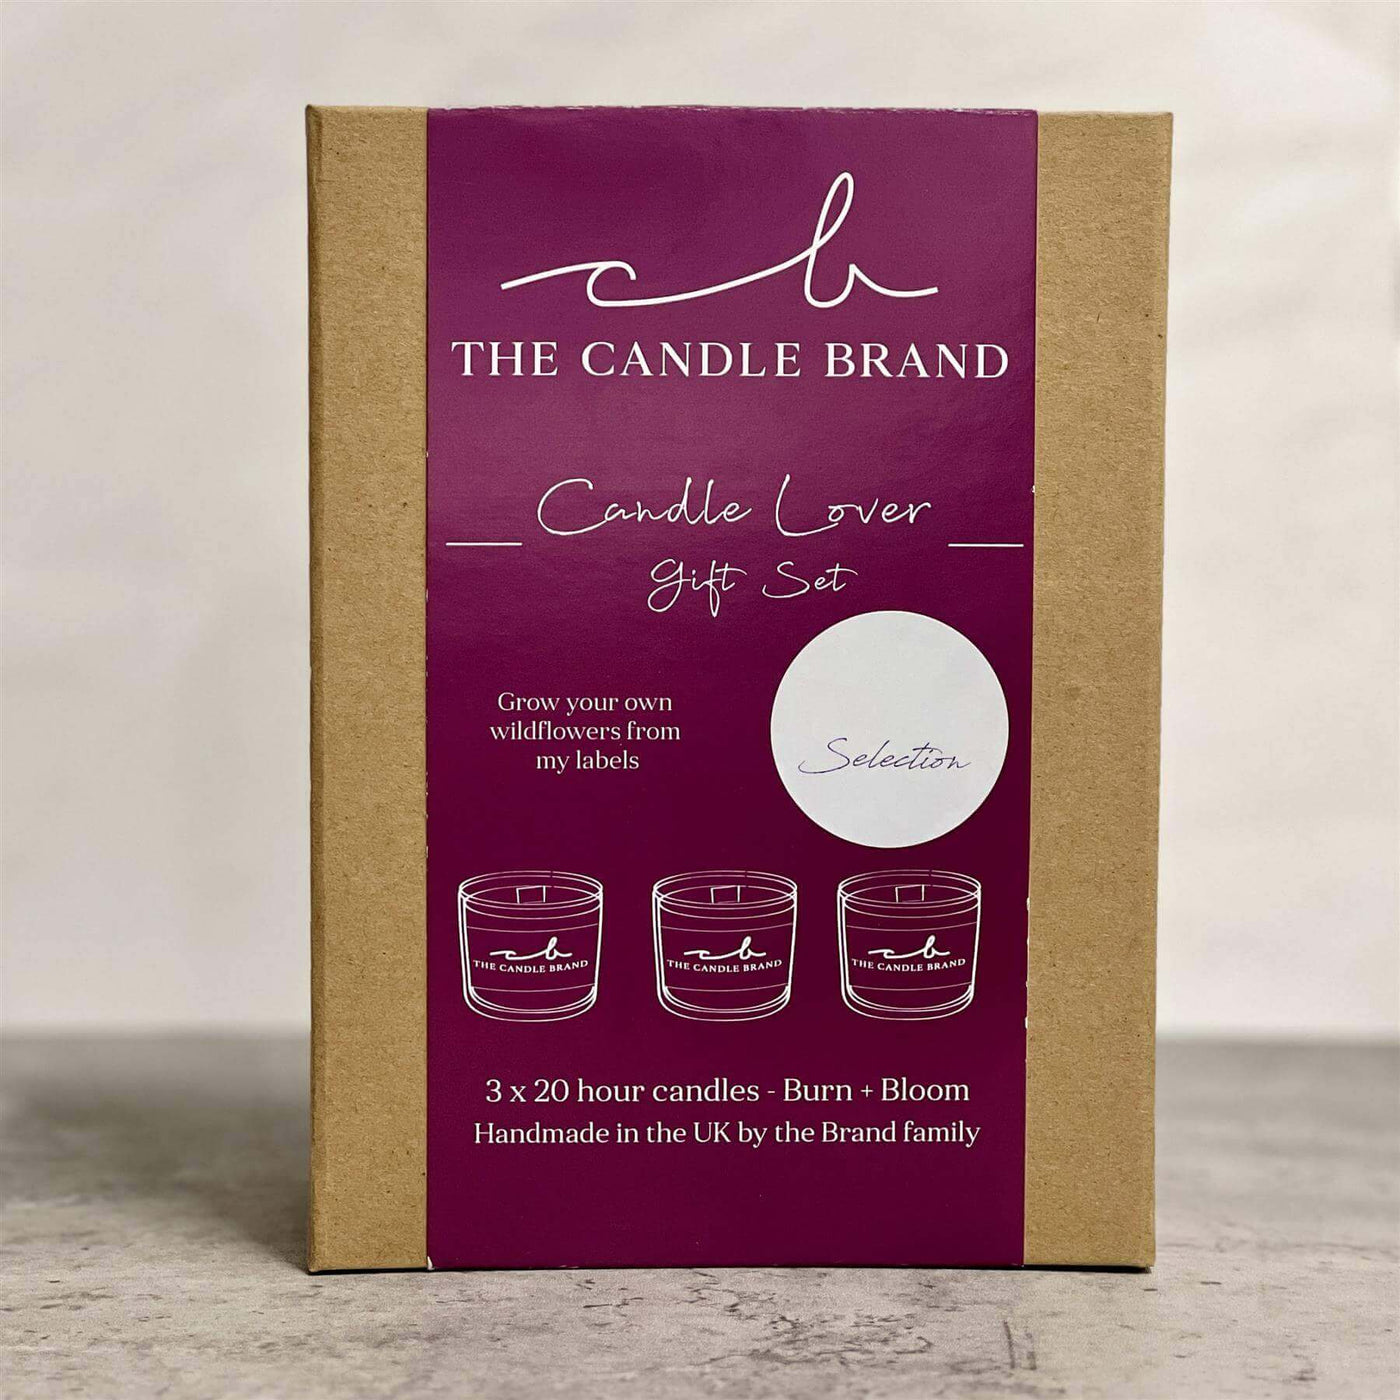 Candle Lover Gift Set - Fresh Selection